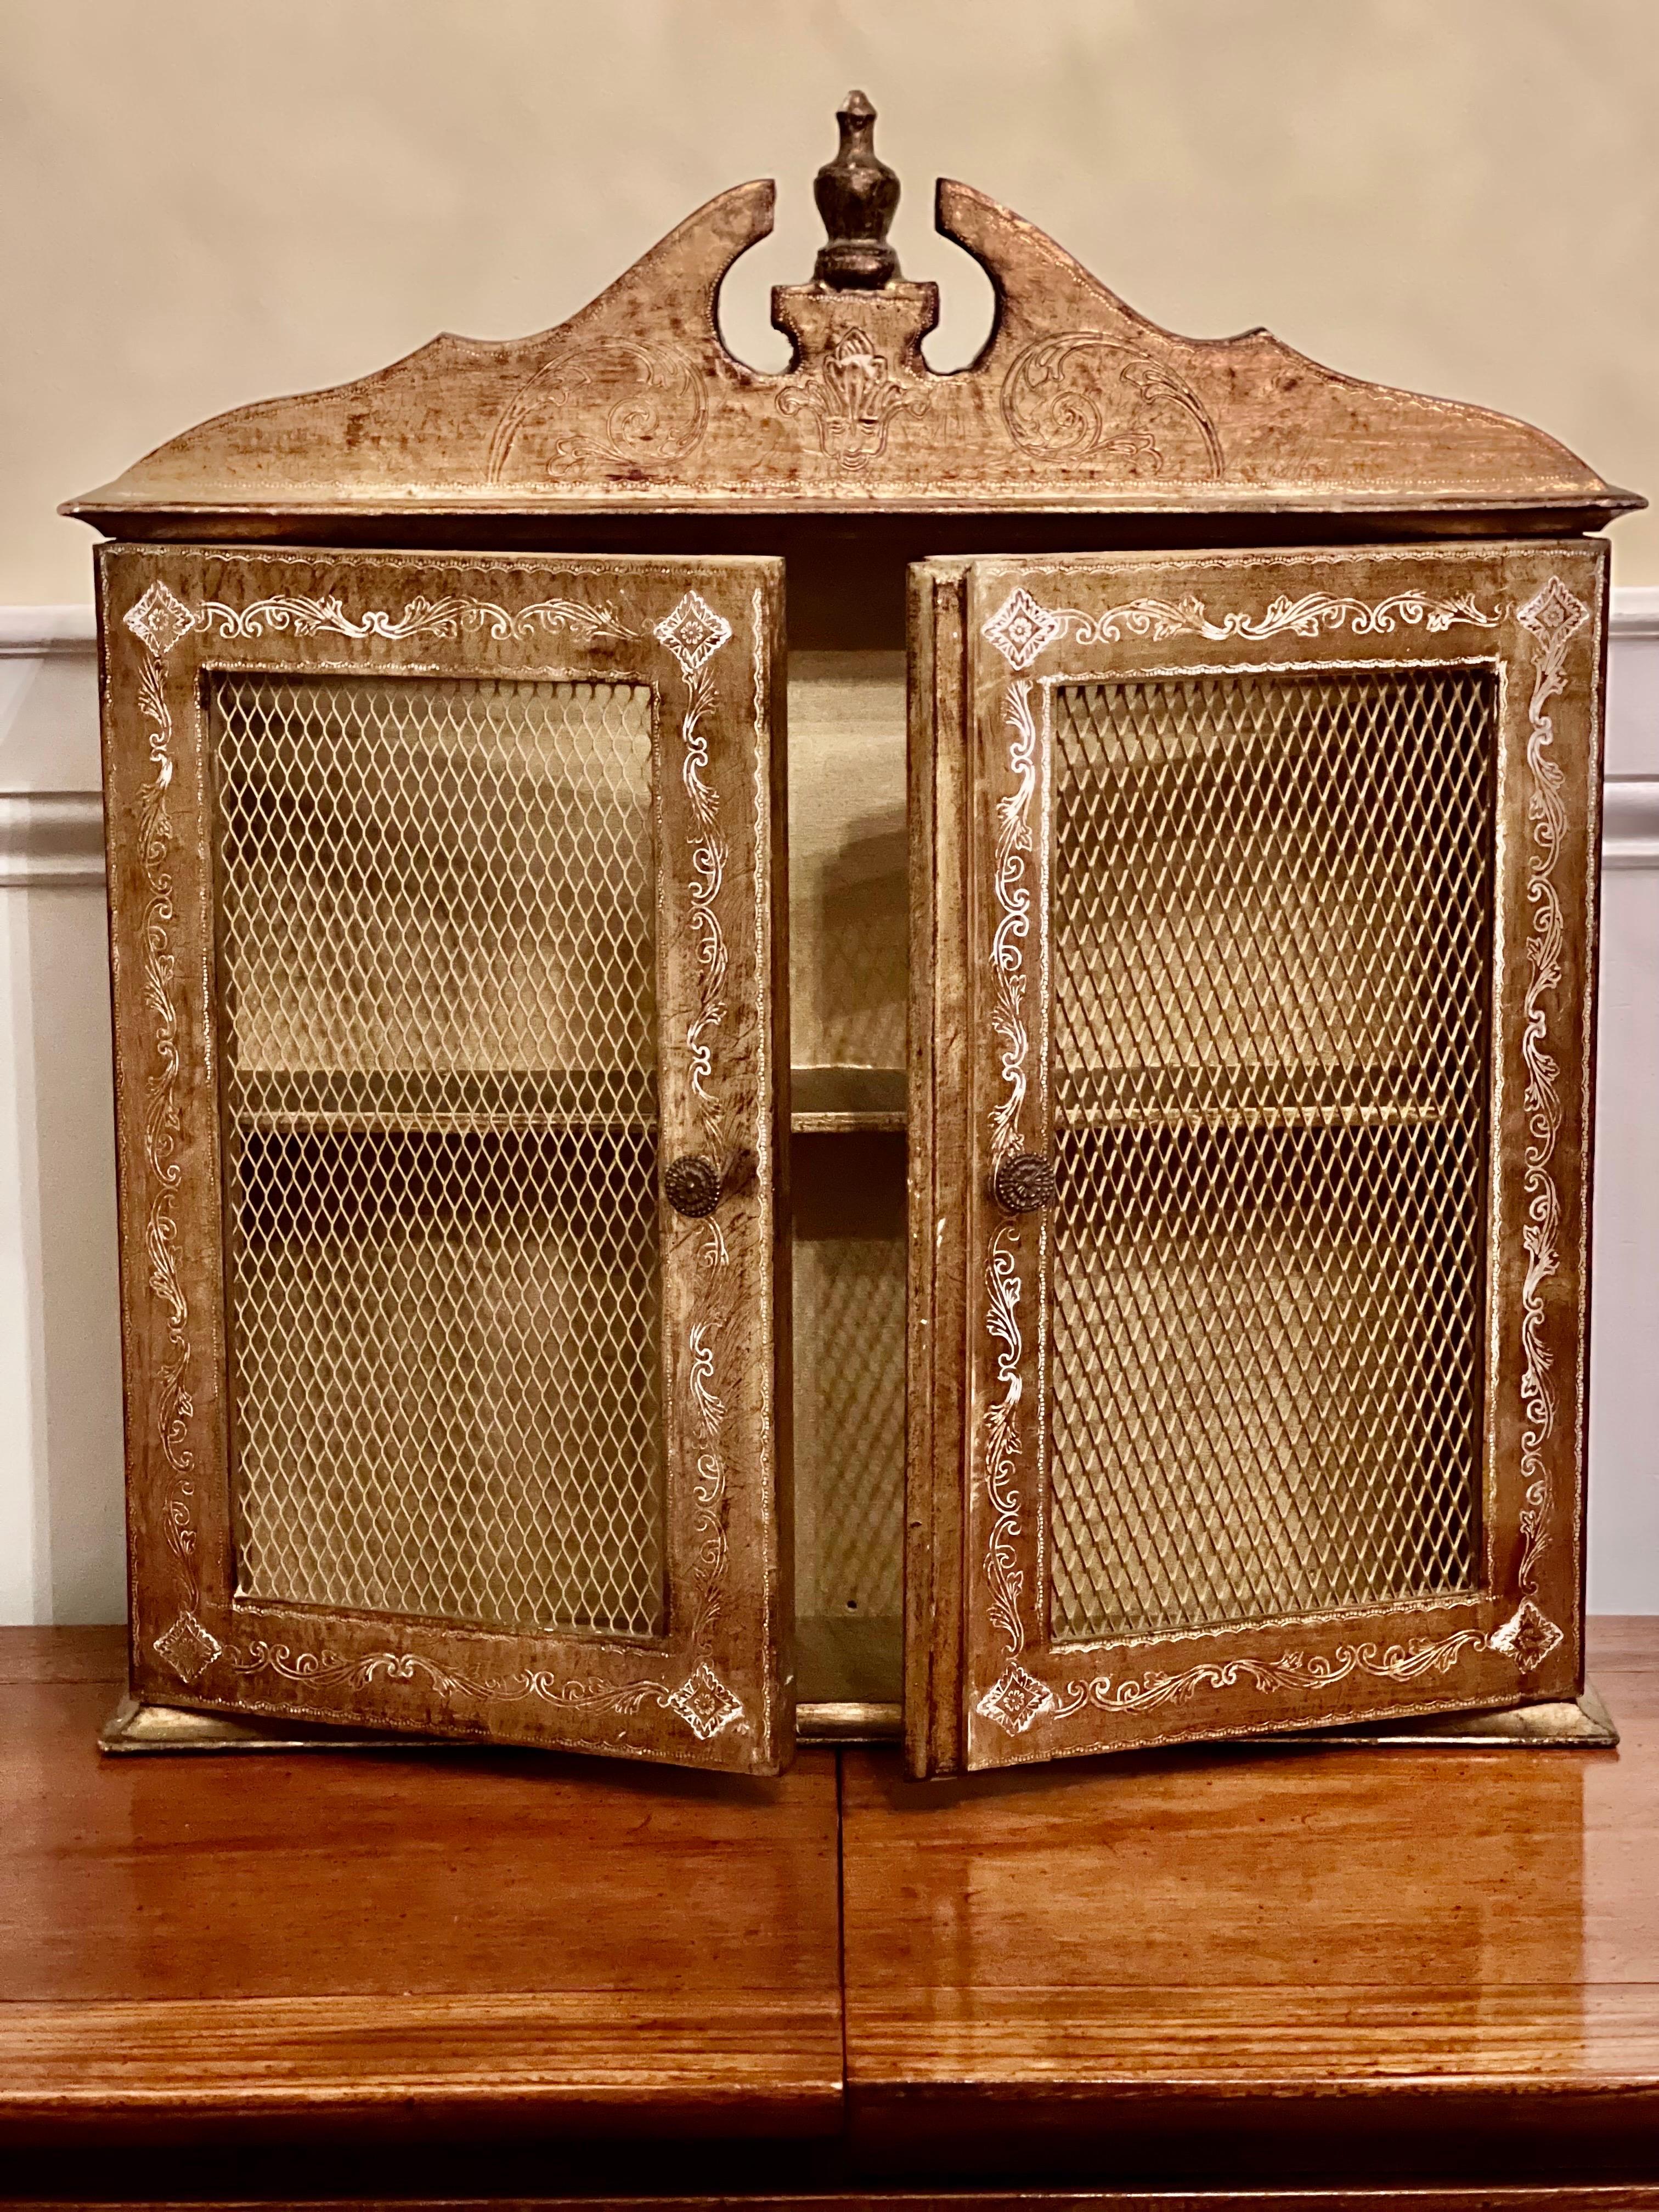 Lovely vintage handcrafted Italian wall cabinet with gold gilt finish and Florentine detail throughout by Florentia, c1930's Italy. Intricate hand painted and carved white foliate scroll motif adorns the sides and front. Doors have detailed round